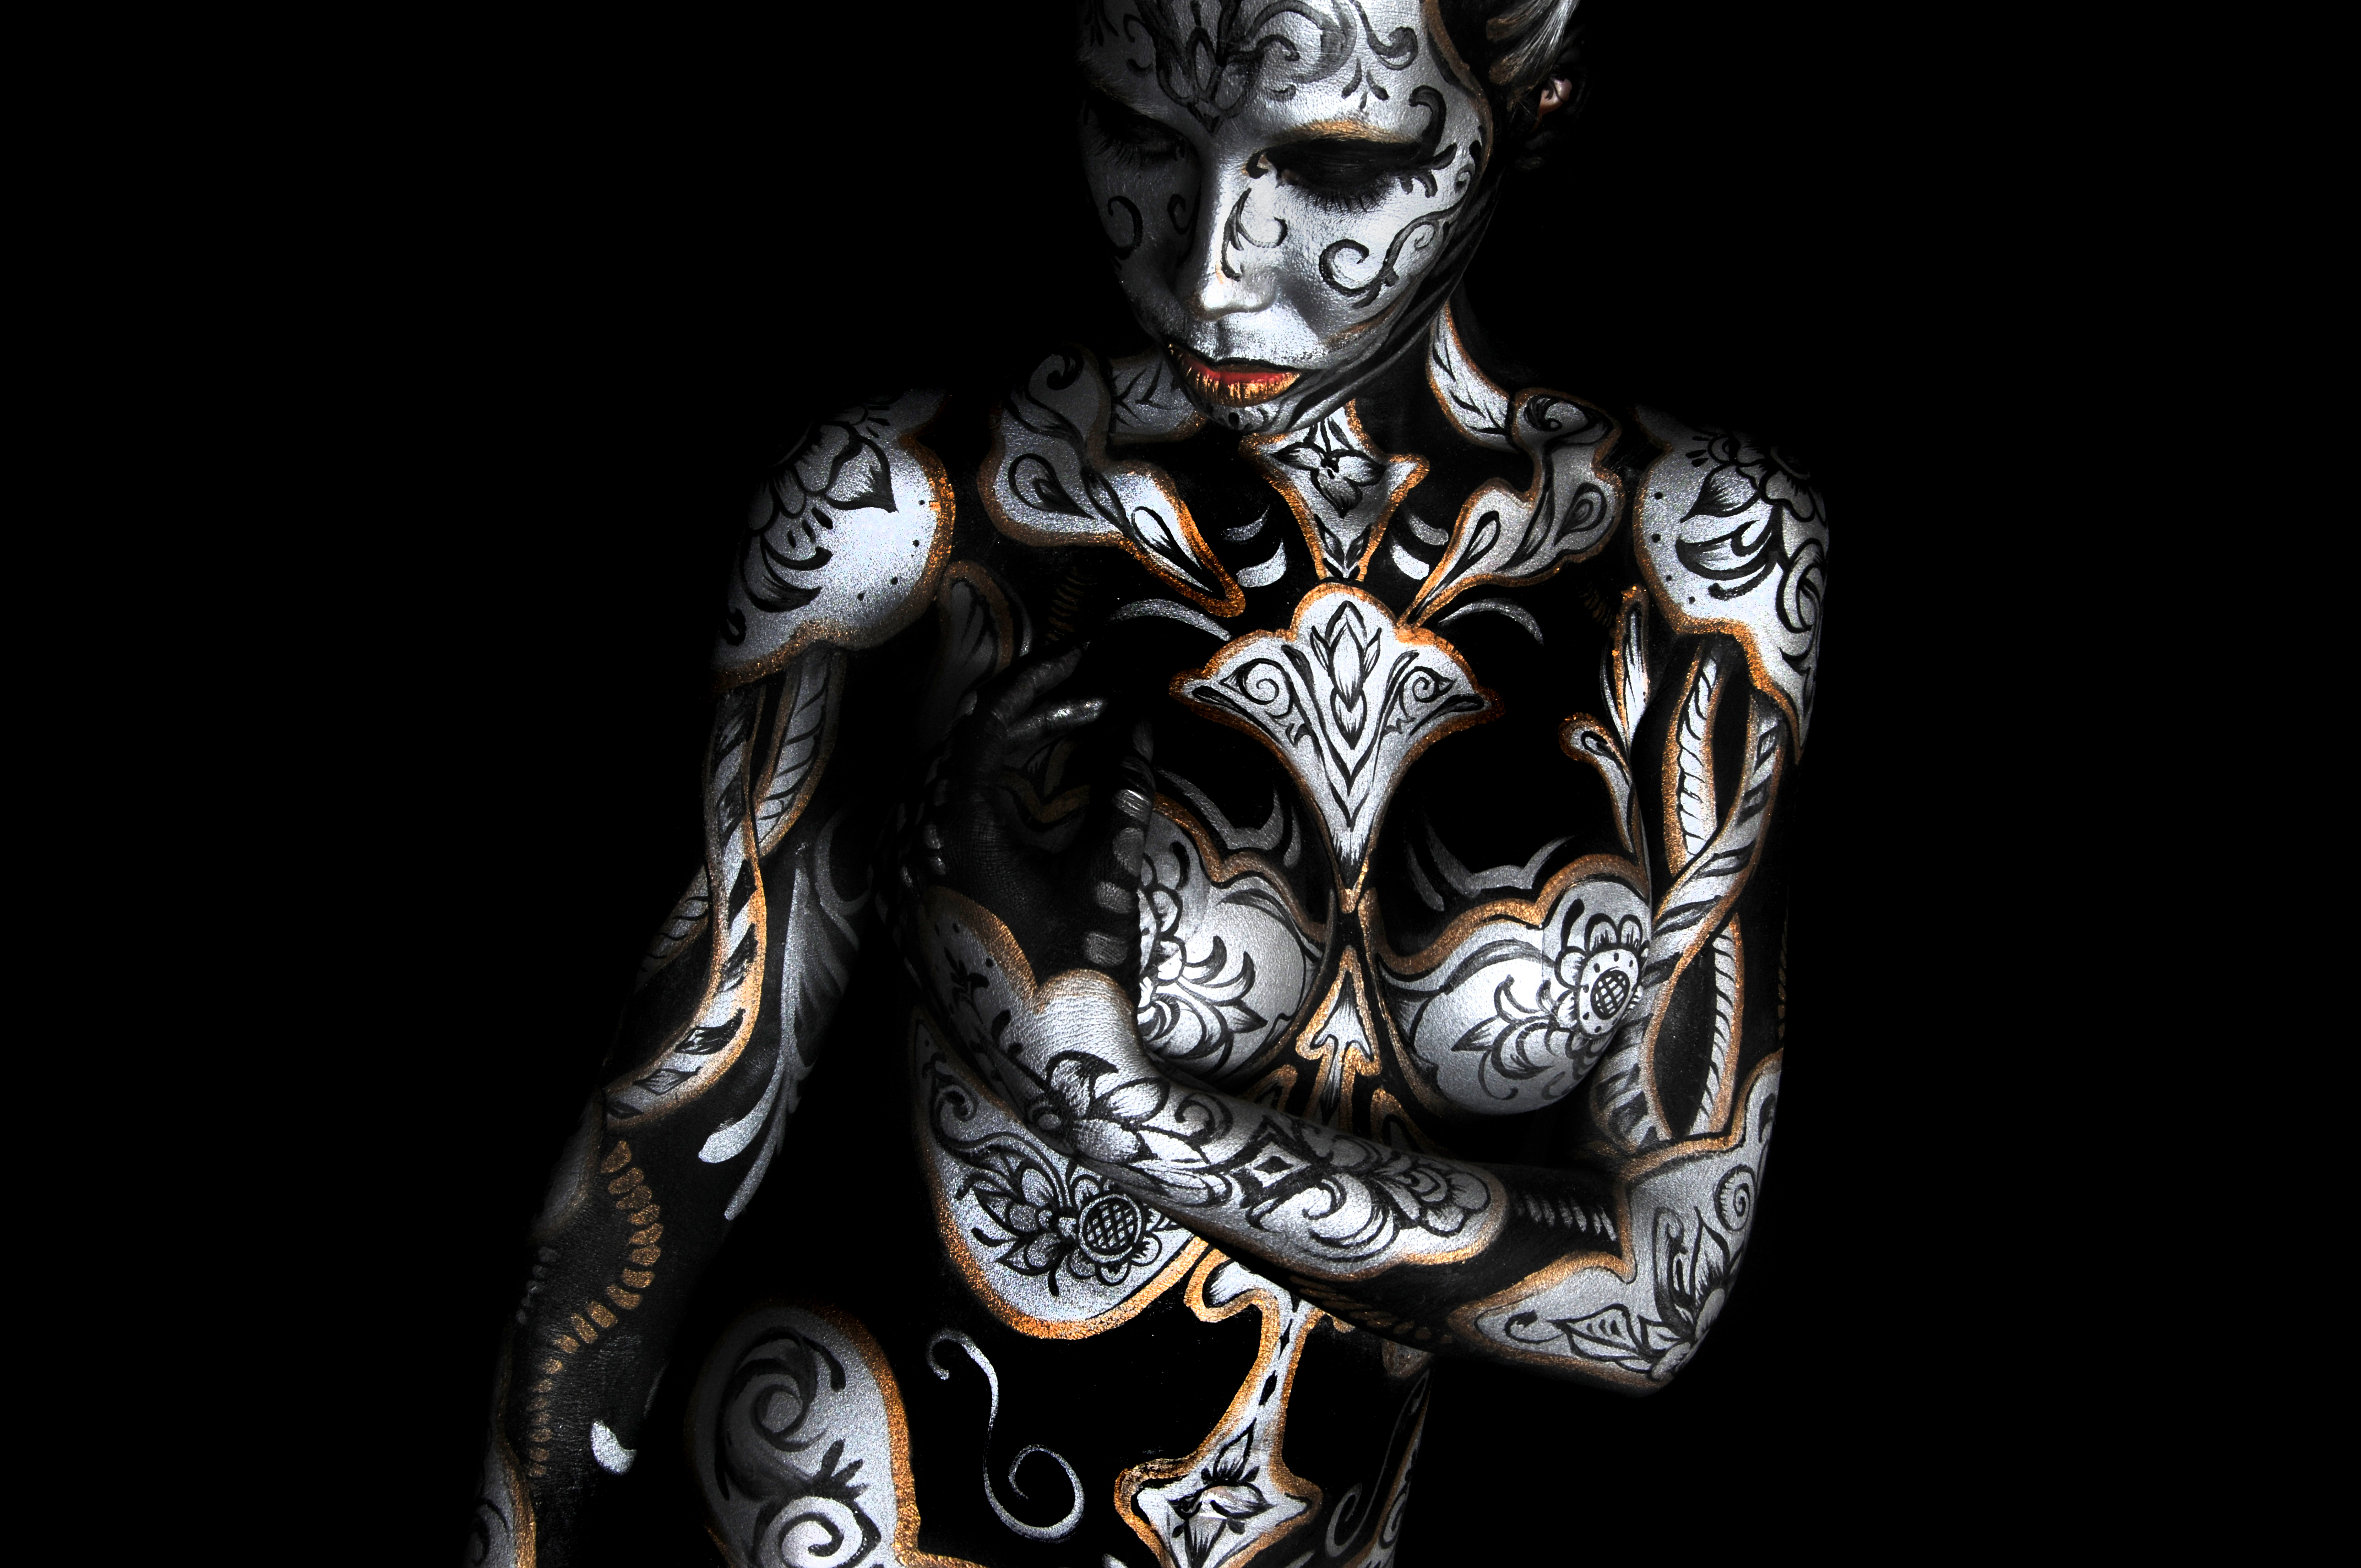 Private Body Painting + Private Photoshoot in the Studio < Bodypainting and  Fine Art by Lana Chromium